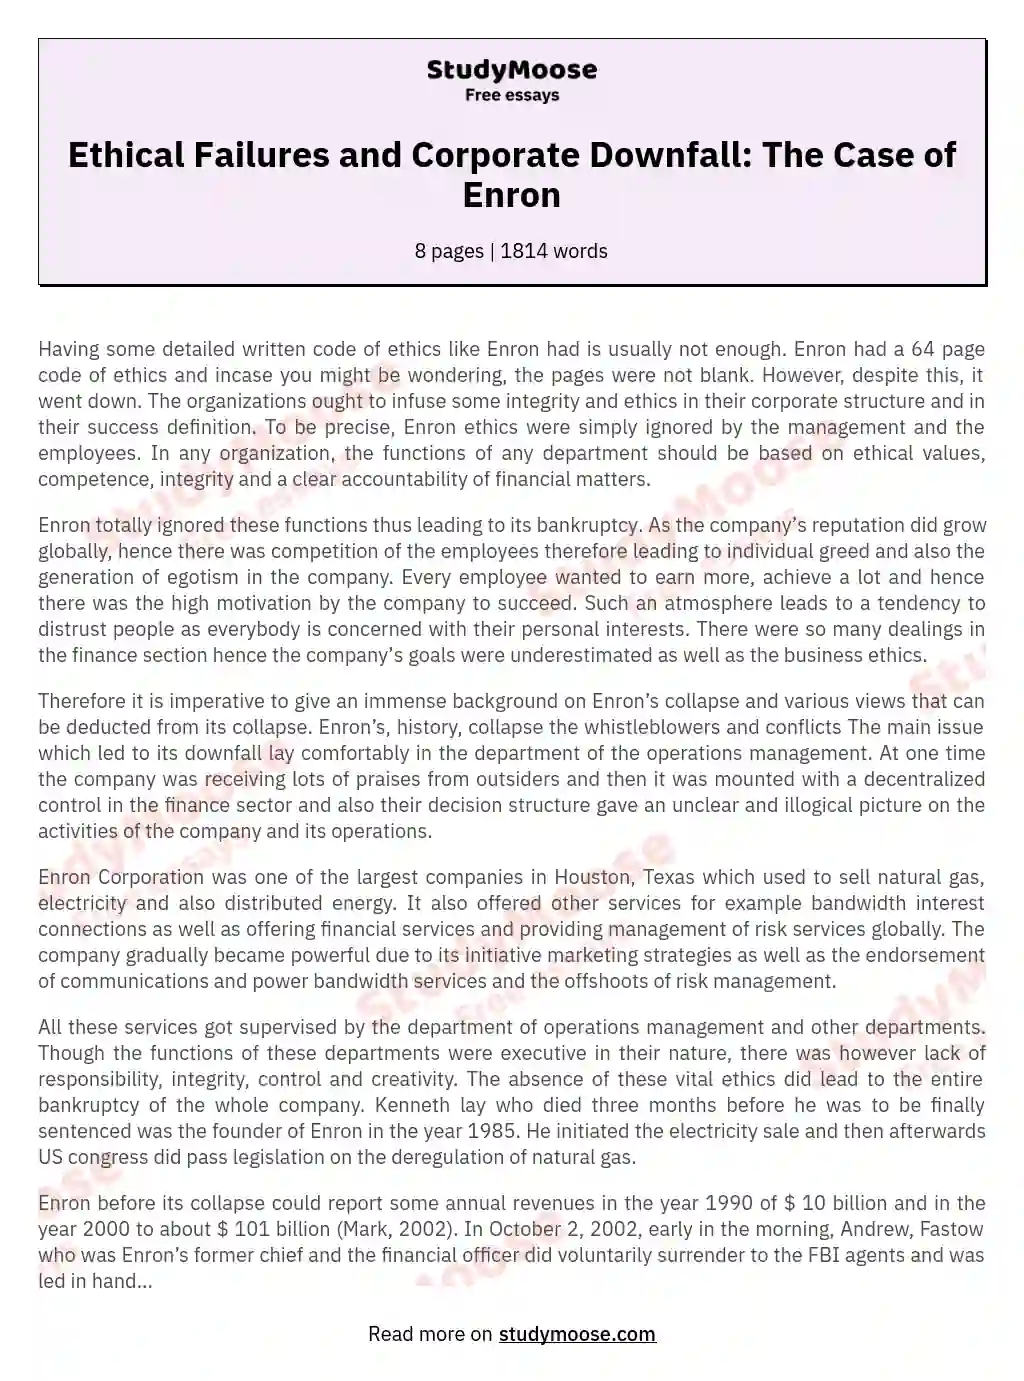 Ethical Failures and Corporate Downfall: The Case of Enron essay